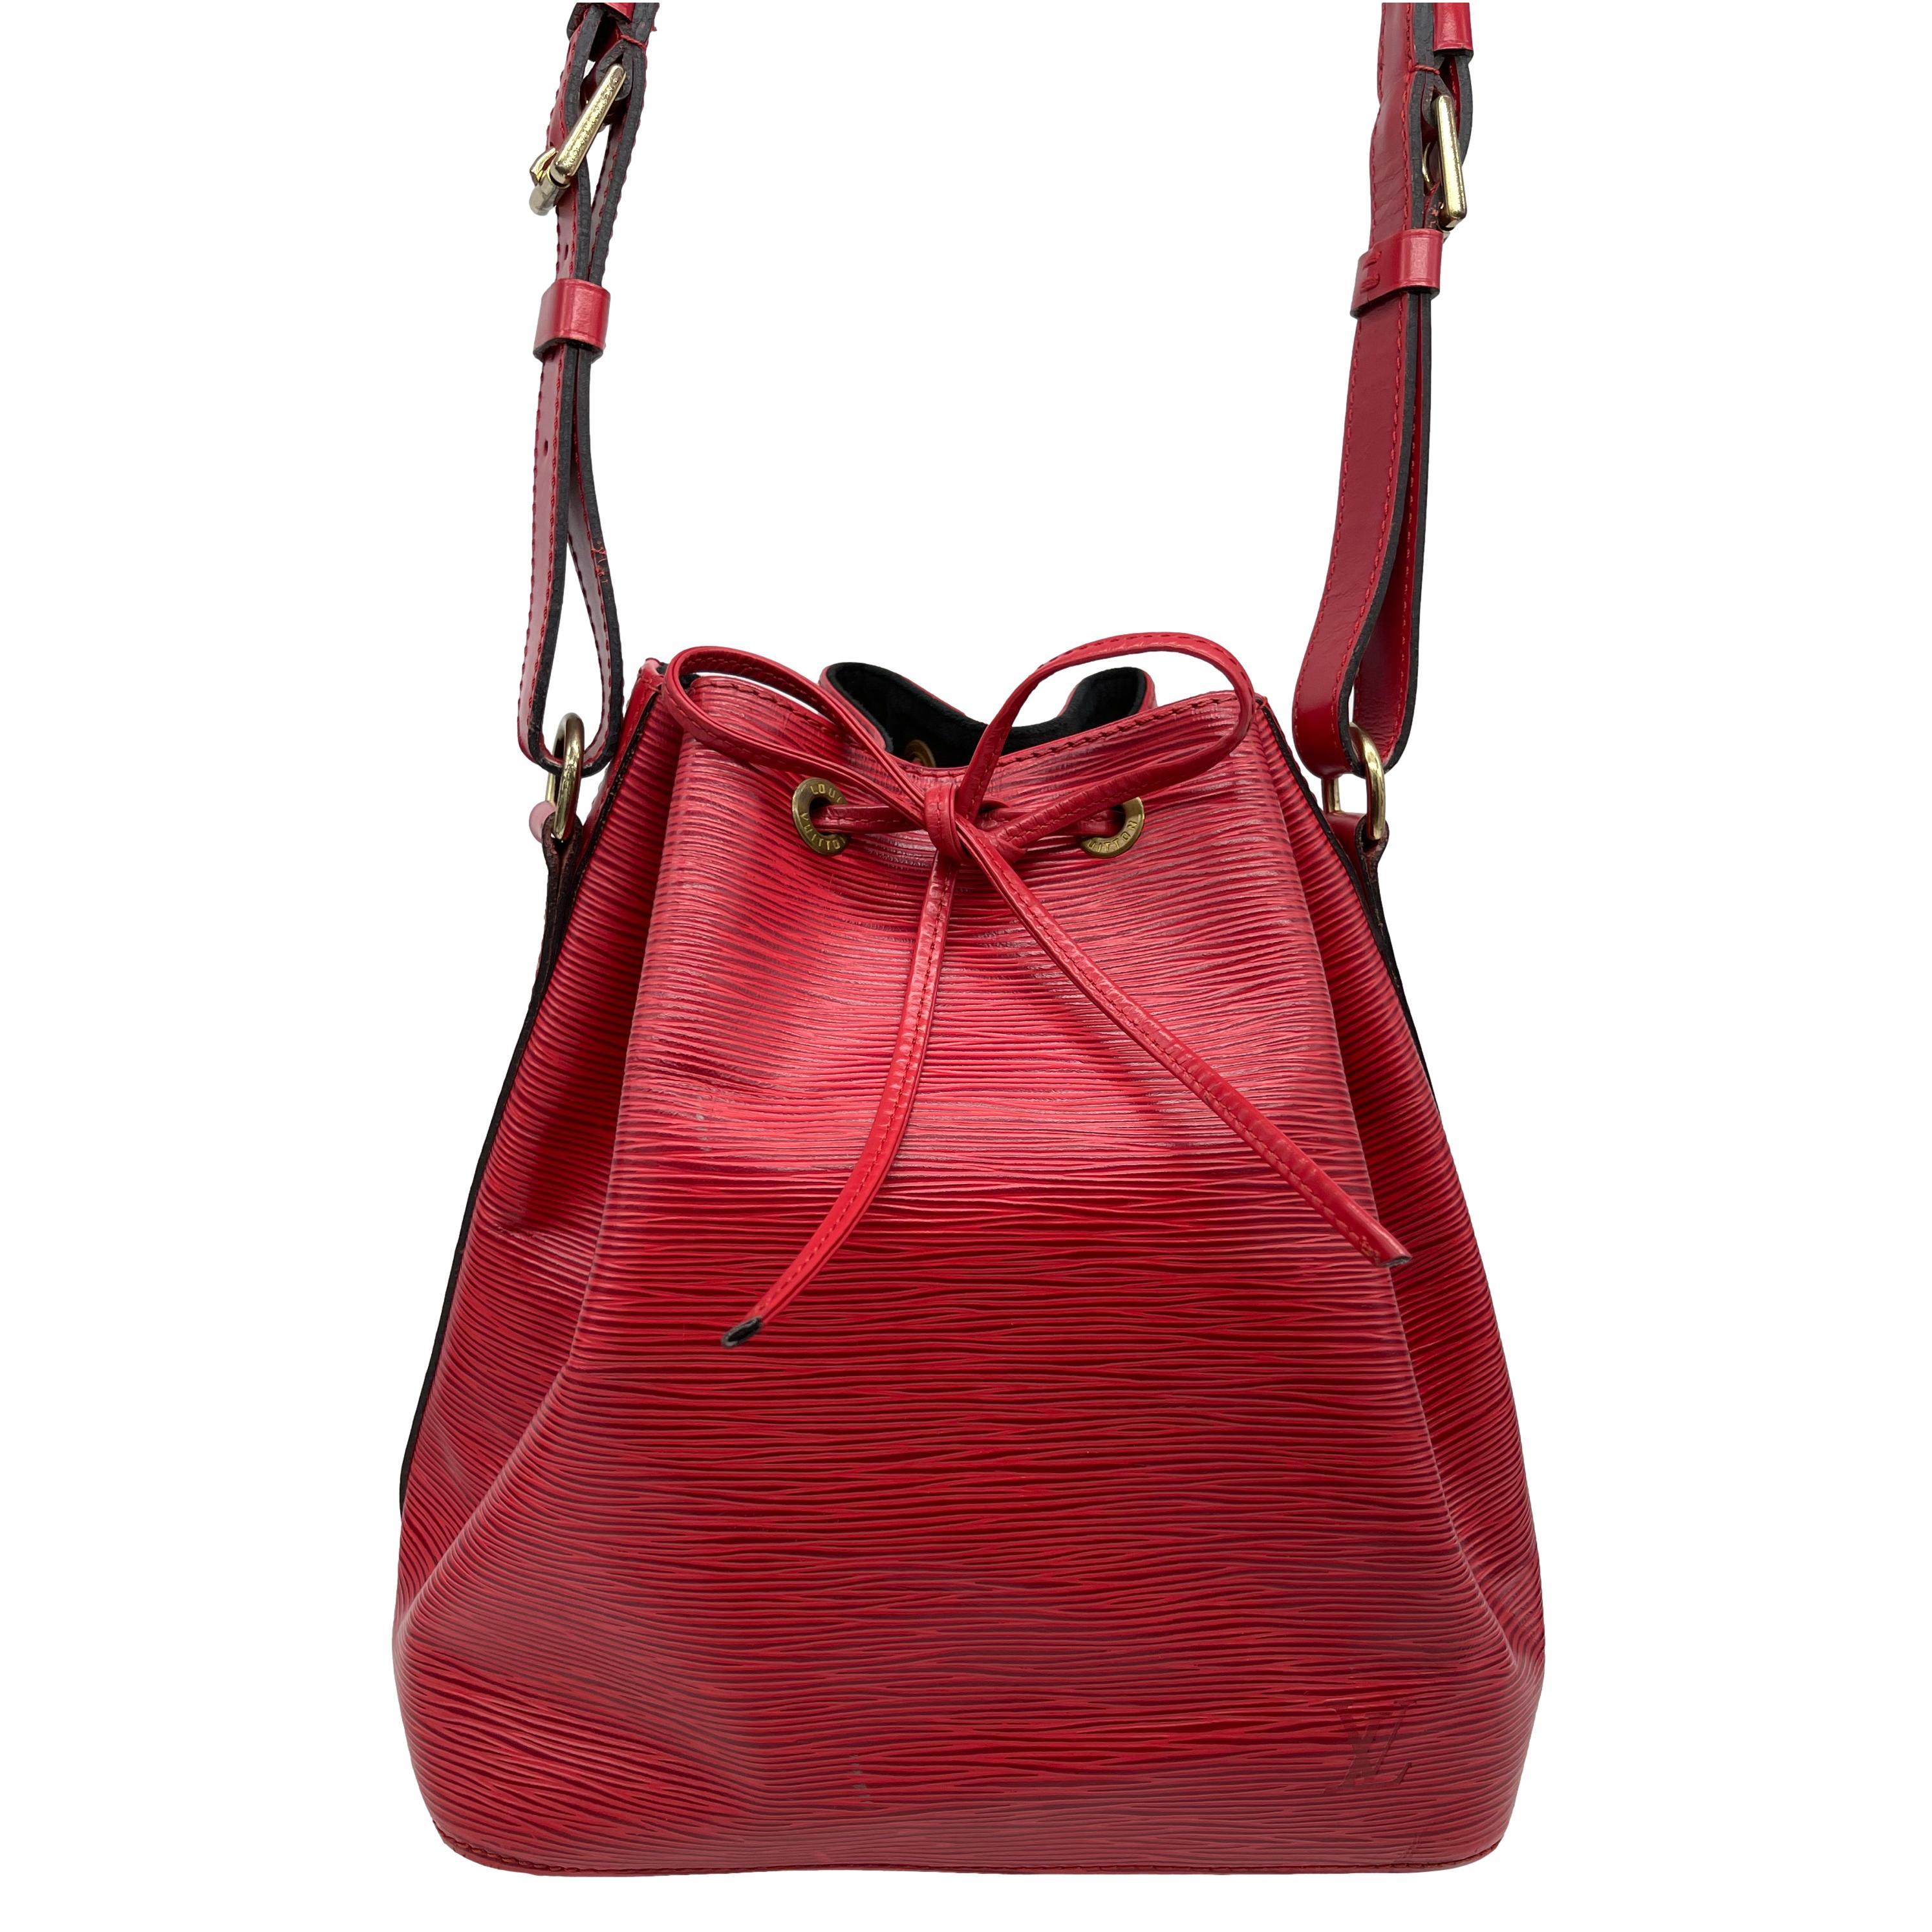 Vintage Louis Vuitton “Noe” PM Bucket Bag in Red EPI Leather, circa 1993. Made in France, the Noe was originally designed by Louis Vuitton’s grandson in 1932 as a bag to carry champagne, specifically four bottles upright and one inverted in the